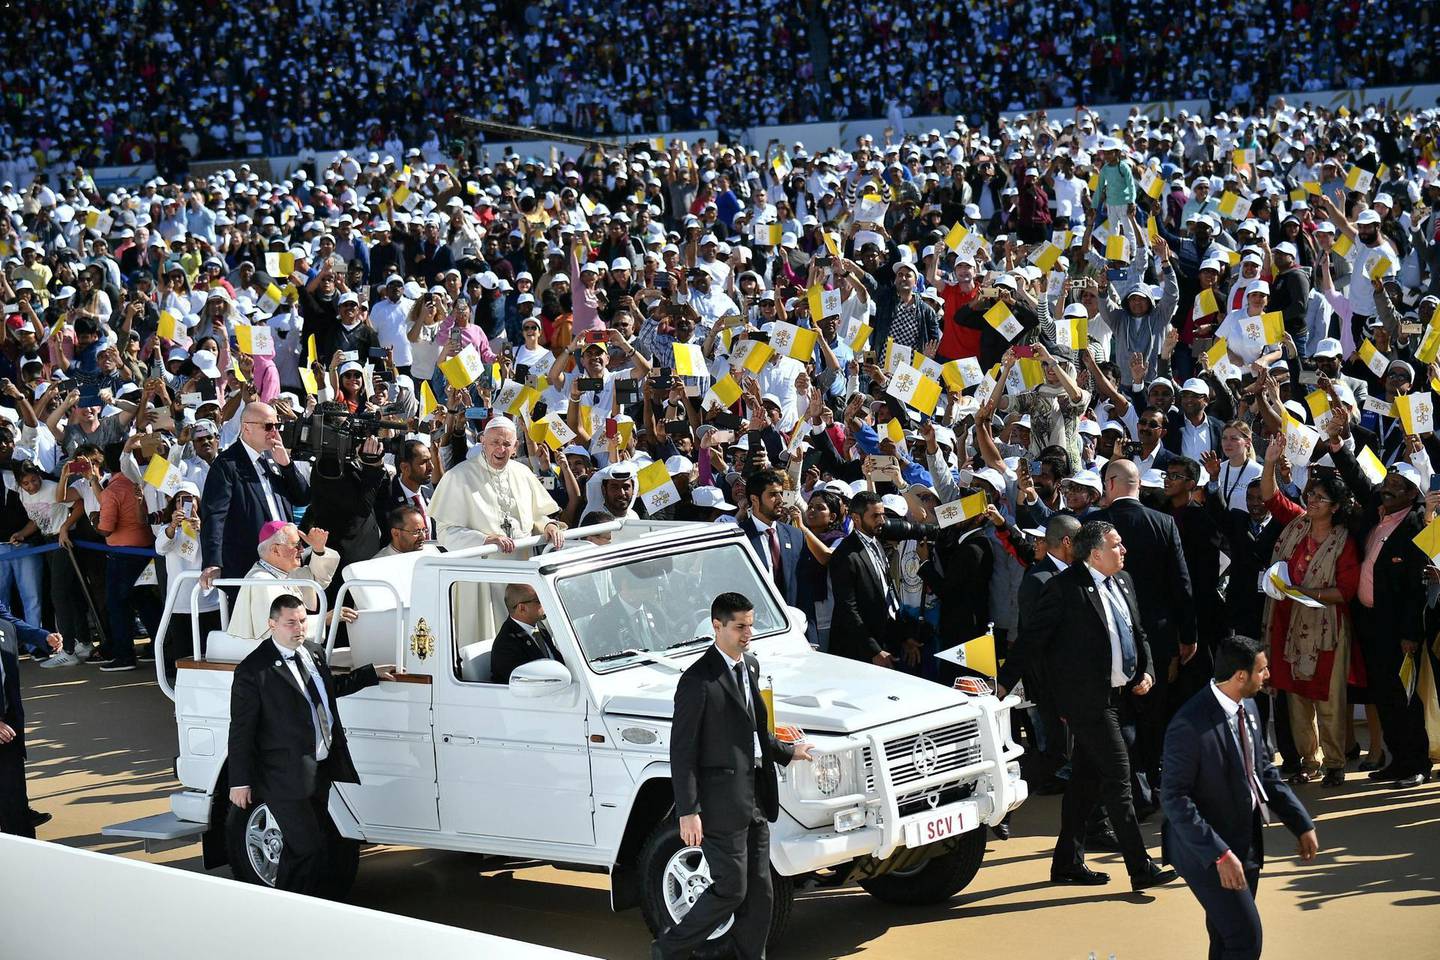 epa07344548 Pope Francis arrives to lead a Holy mass in Zayed Sport City Stadium, in Abu Dhabi, United Arab Emirates, 05 February 2019. Pope Francis is visiting the United Arab Emirates from 03 to 05 February.  EPA/LUCA ZENNARO